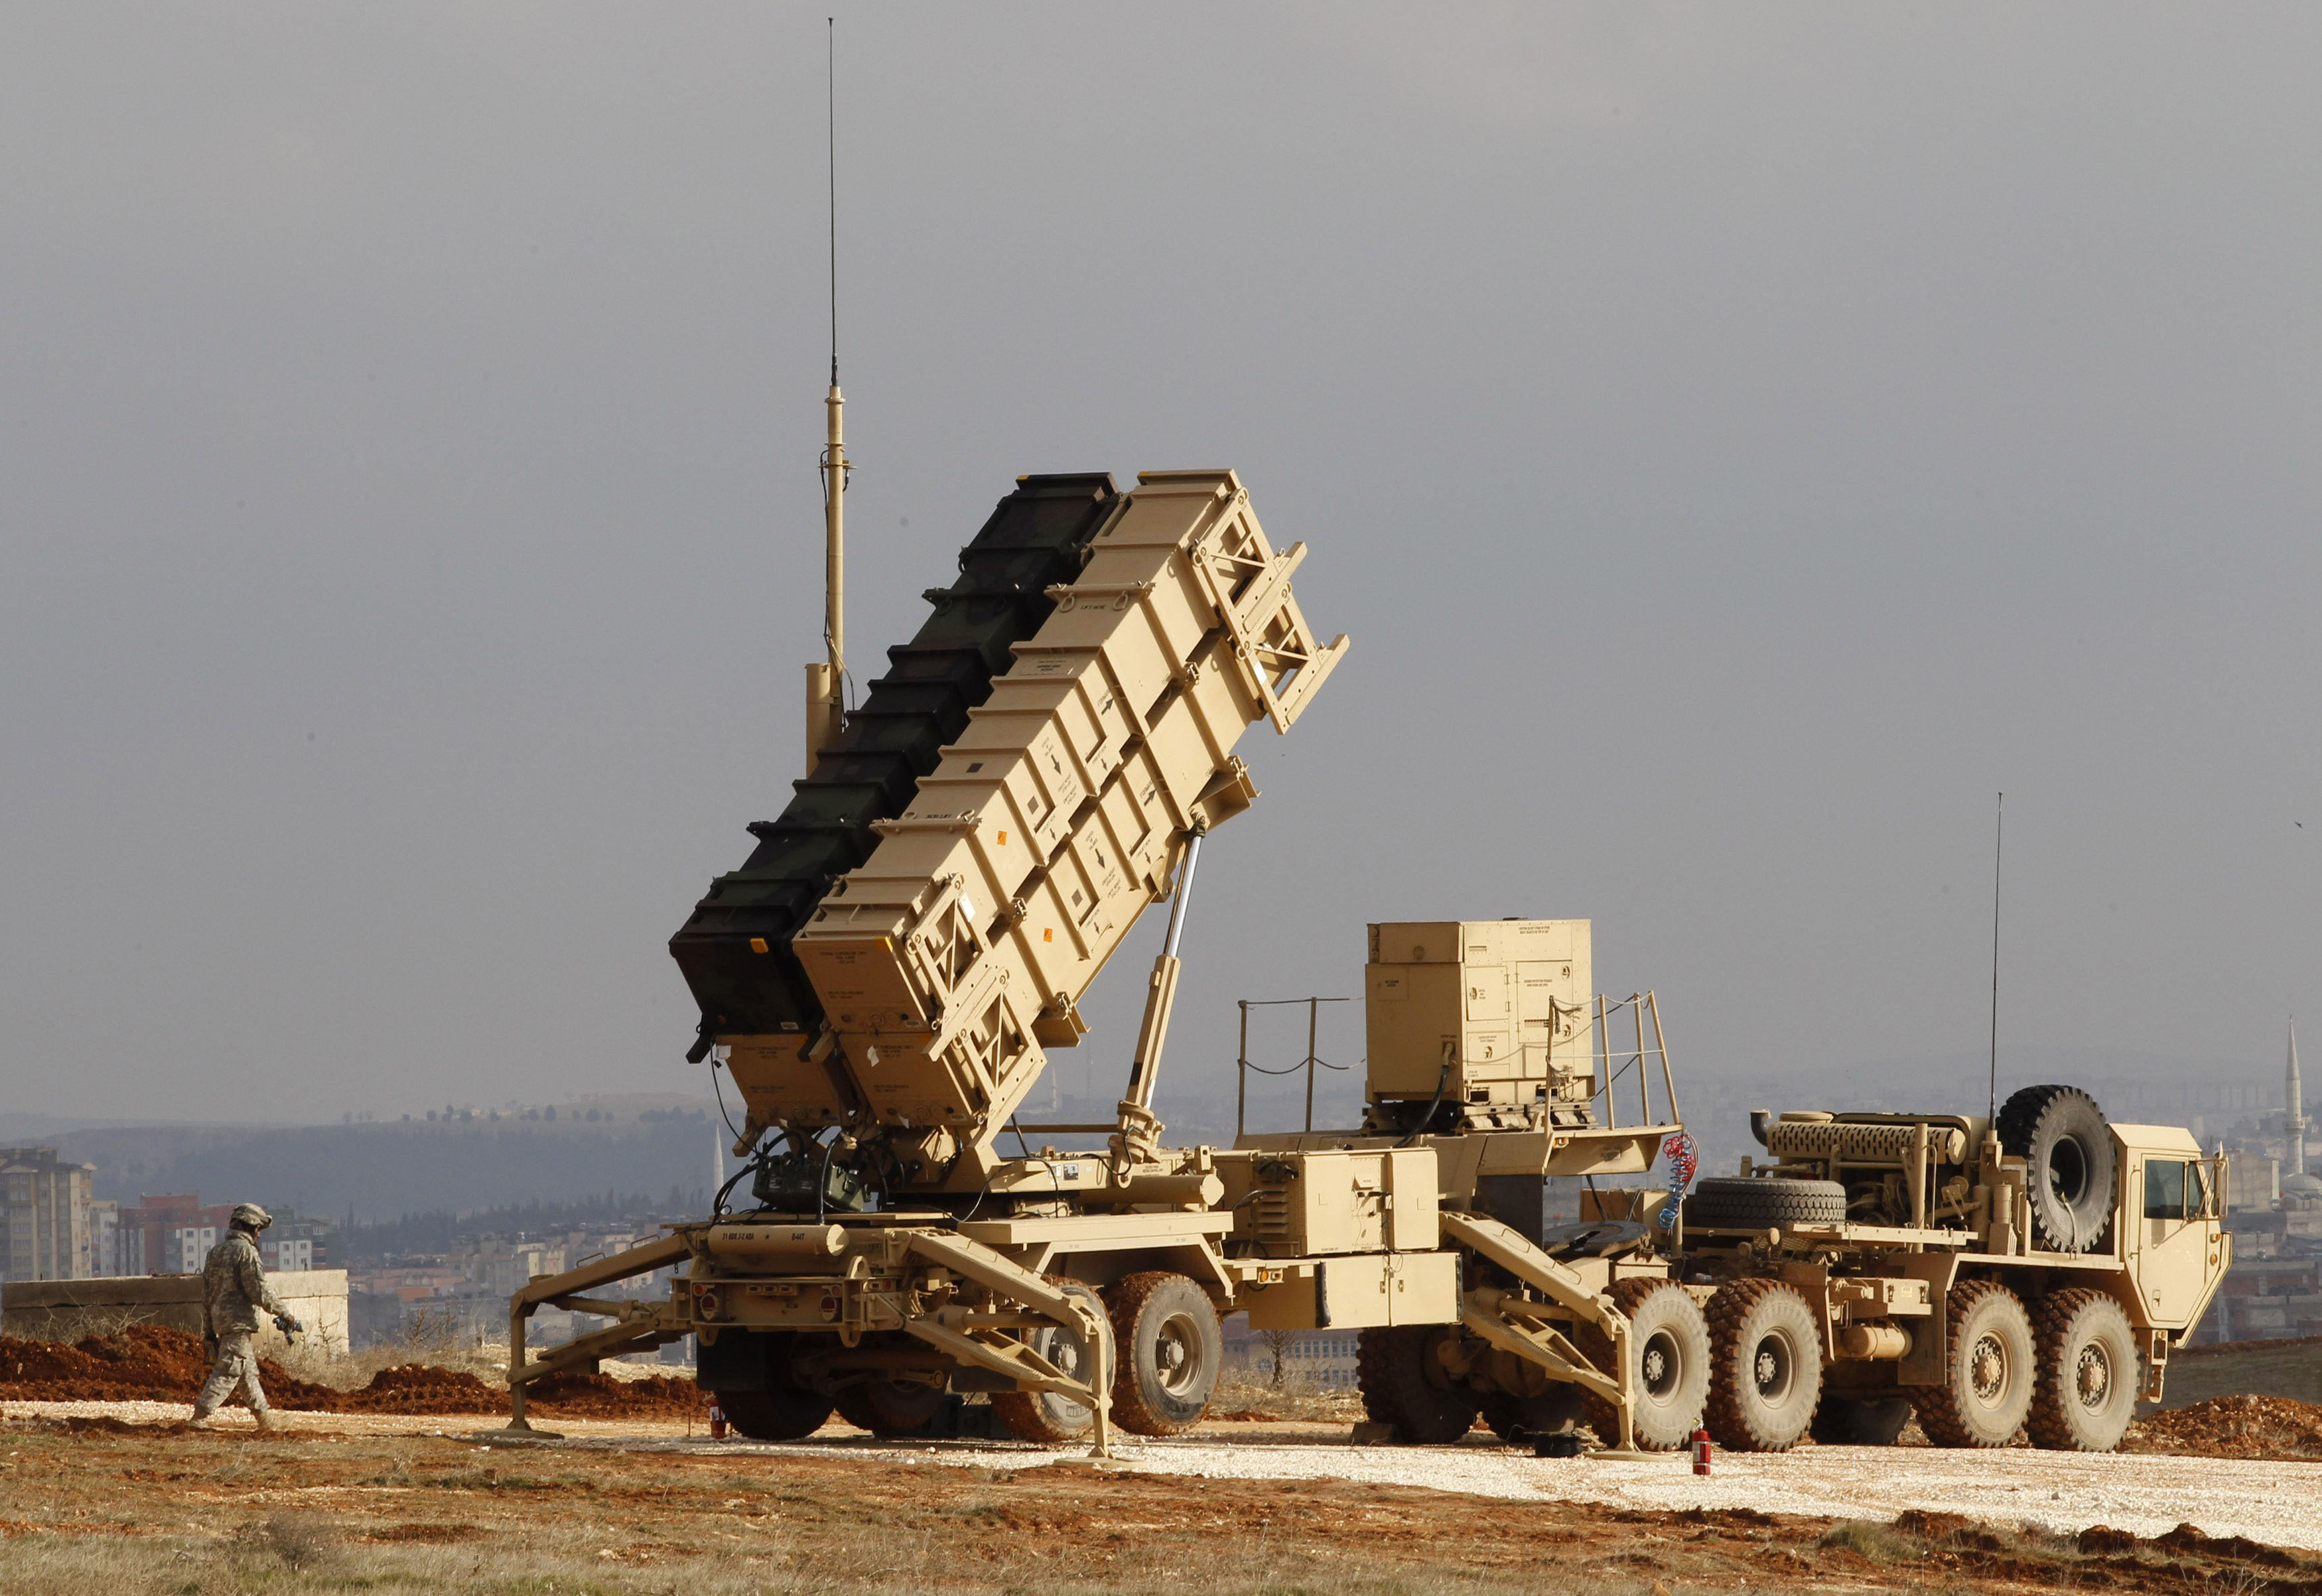 US allies have used Patriot missiles to shoot down consumer drones